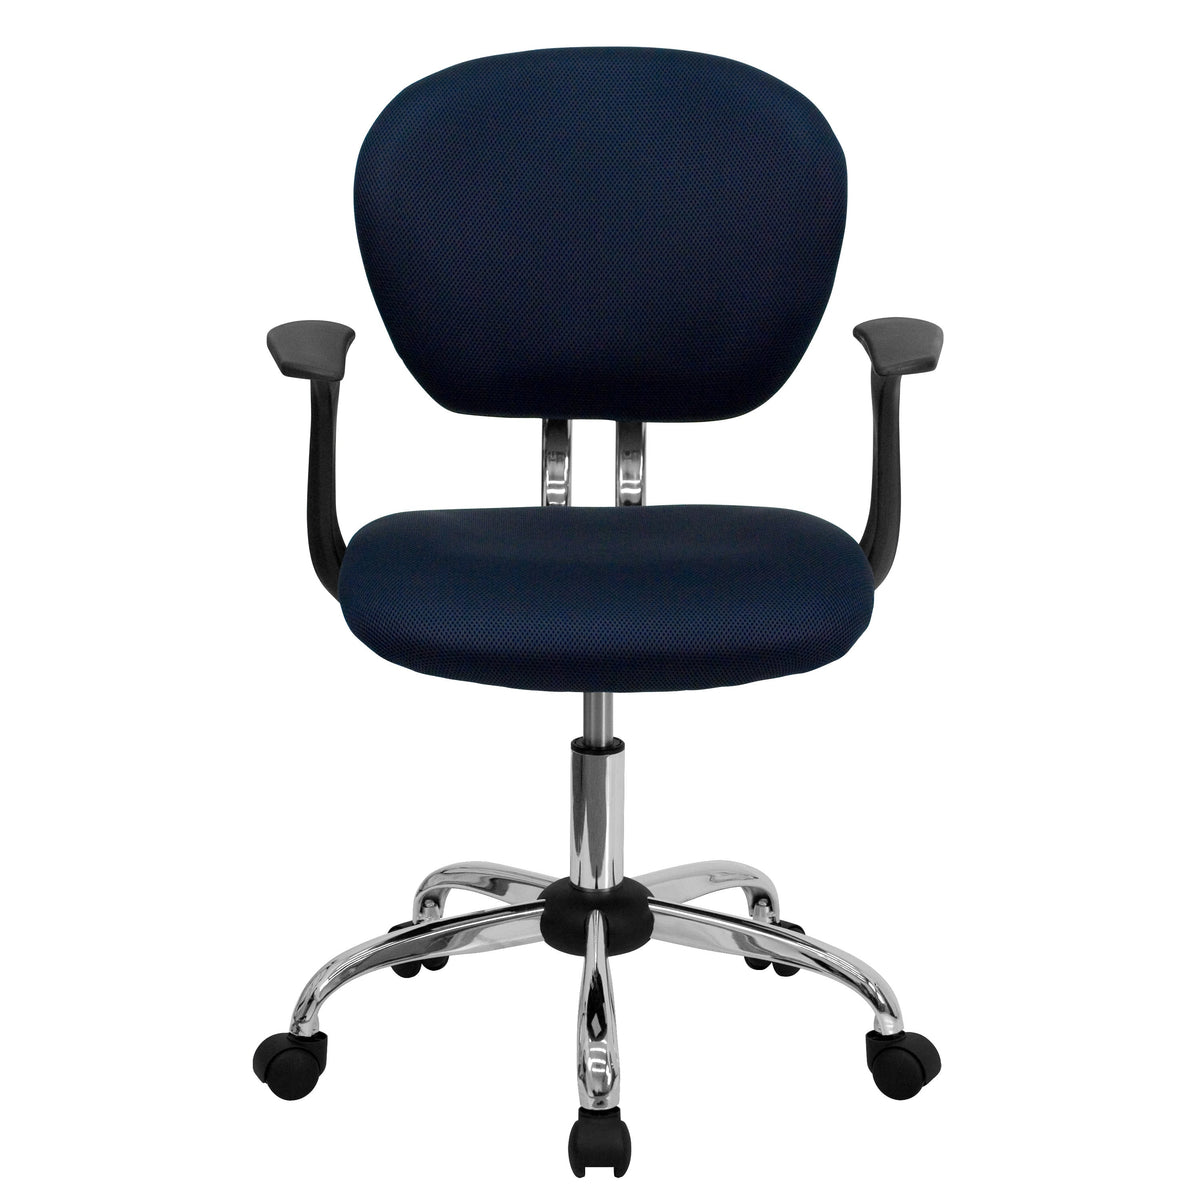 Navy |#| Mid-Back Navy Mesh Padded Swivel Task Office Chair with Chrome Base and Arms